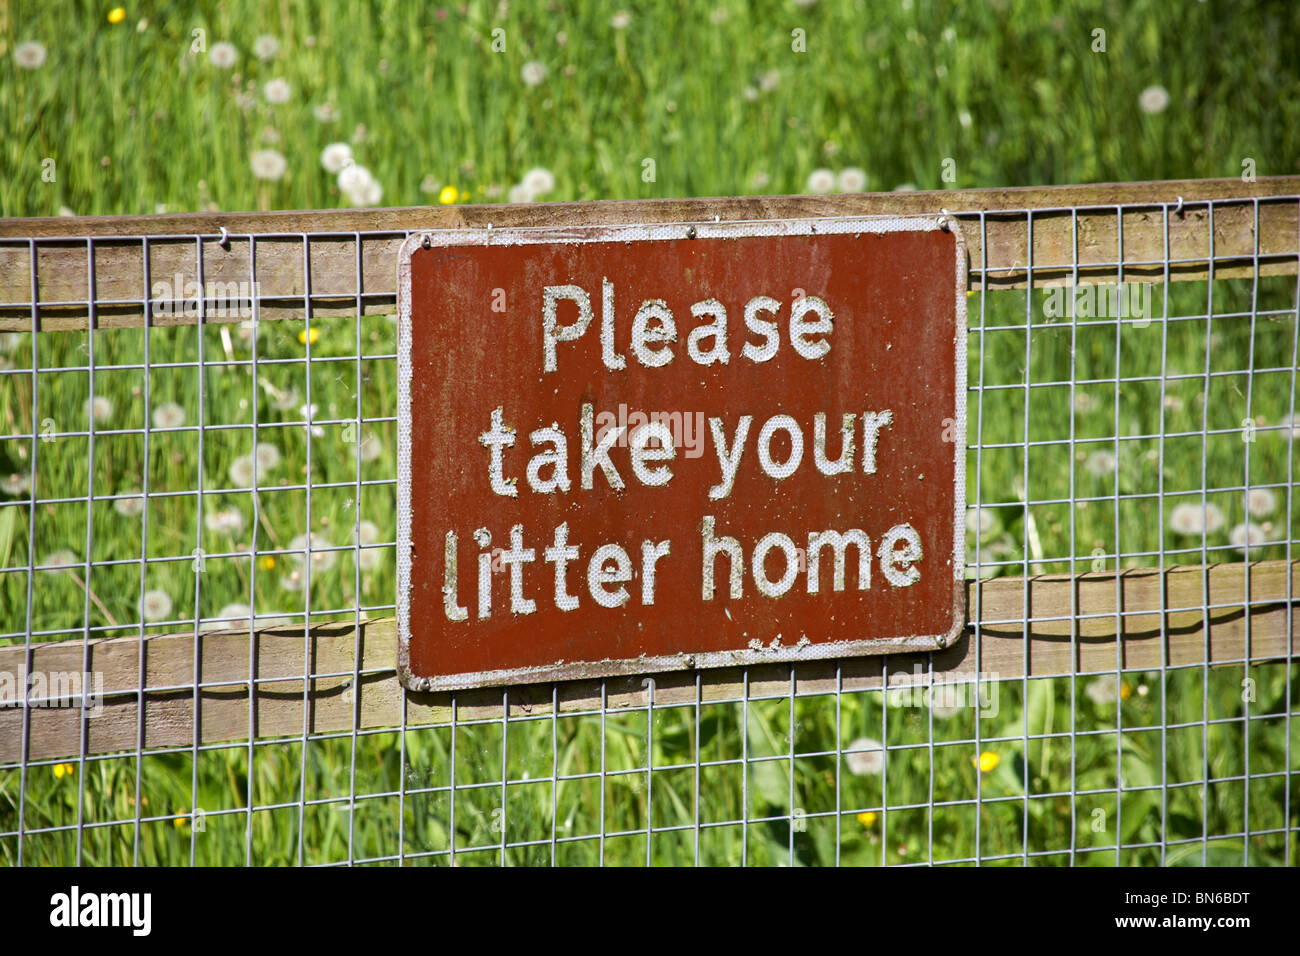 Please take your litter home notice on fence Stock Photo